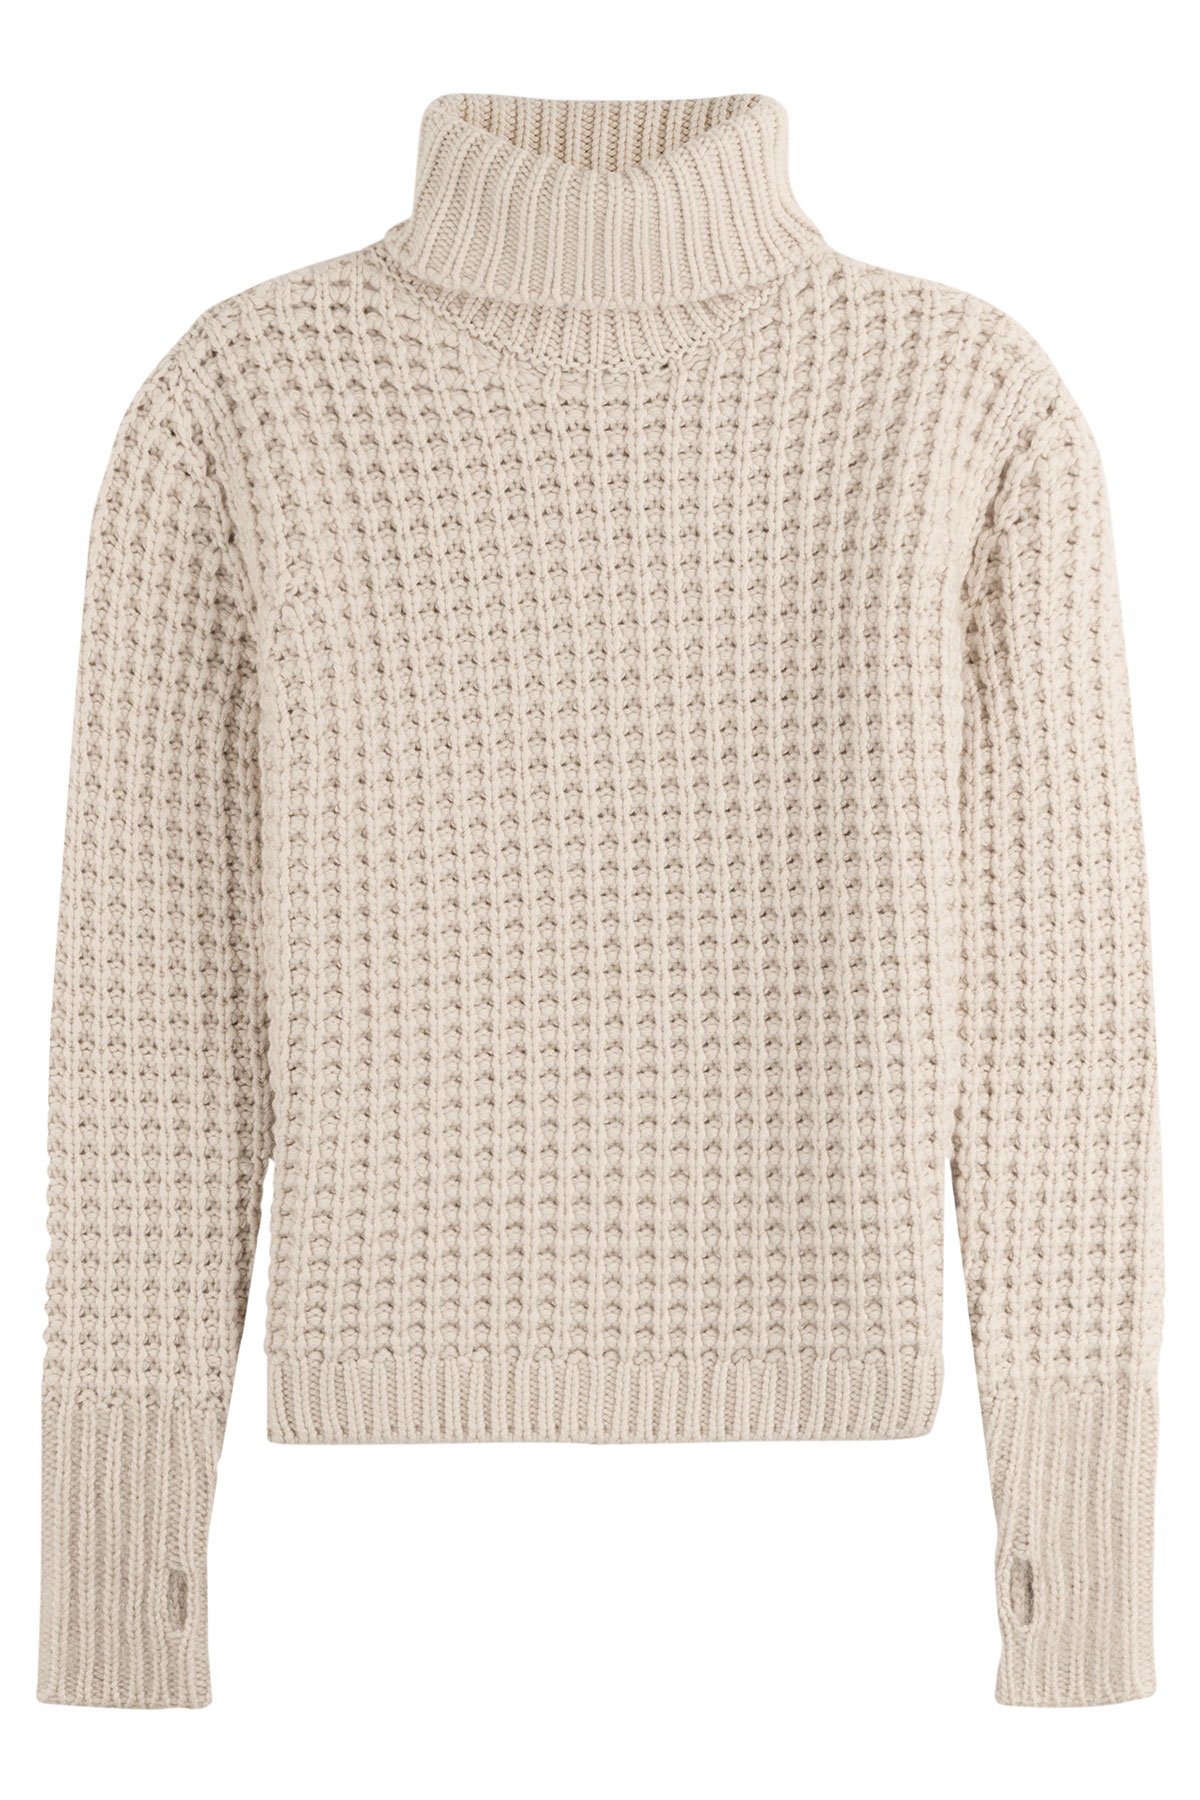 Fendi Cashmere-mohair Waffle Knit Turtleneck Pullover - Beige in ...